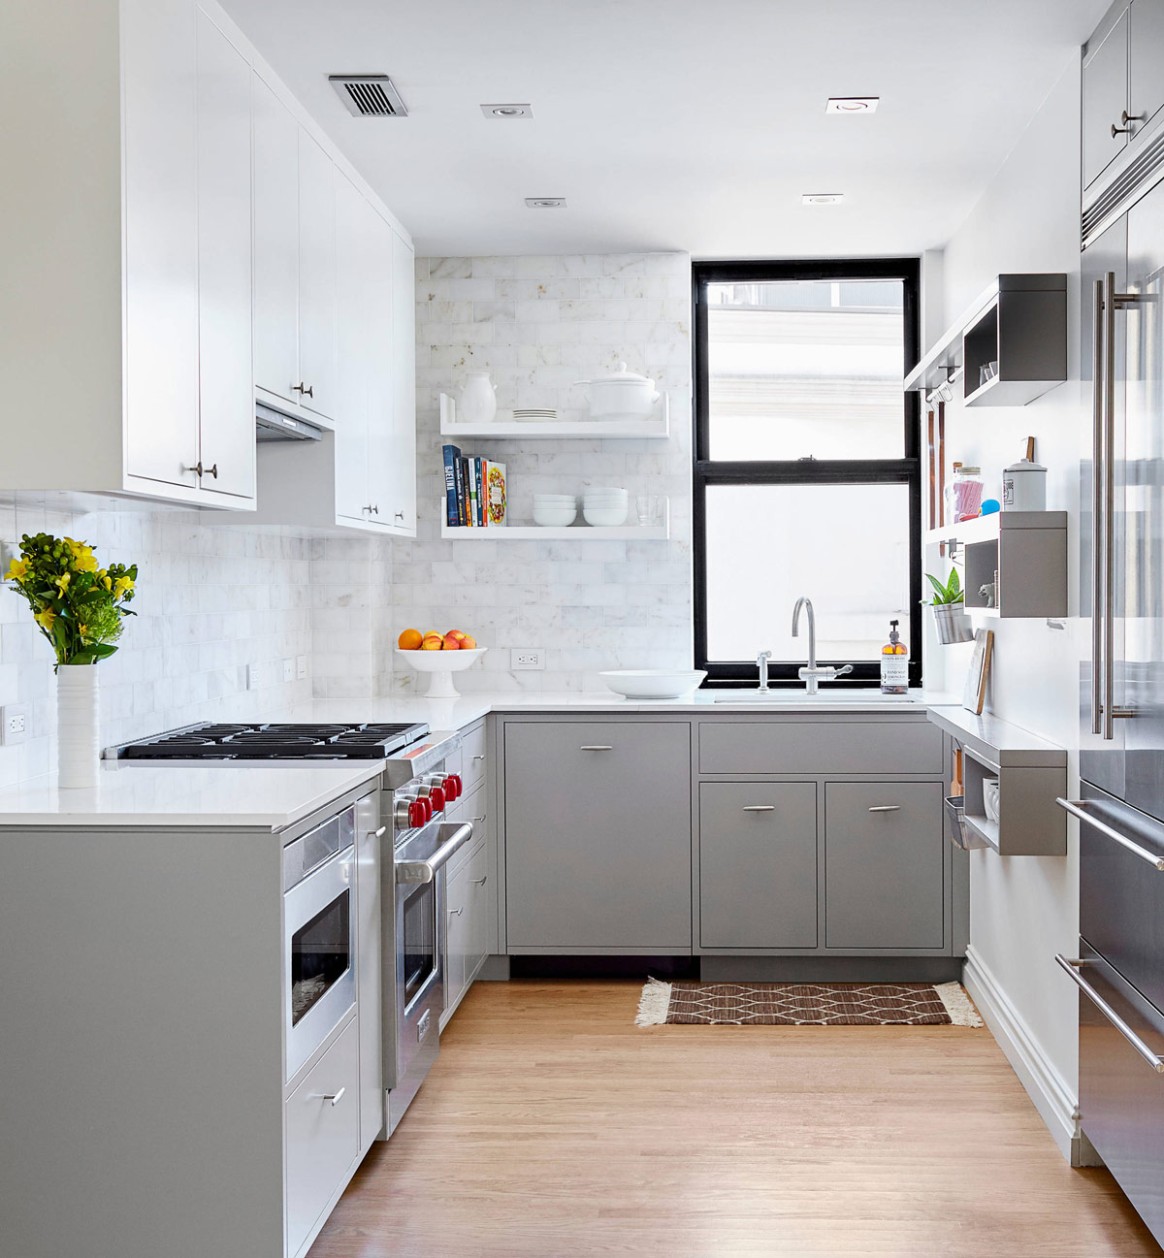 3 Gorgeous Grey and White Kitchens that Get Their Mix Right - grey and white kitchen designs